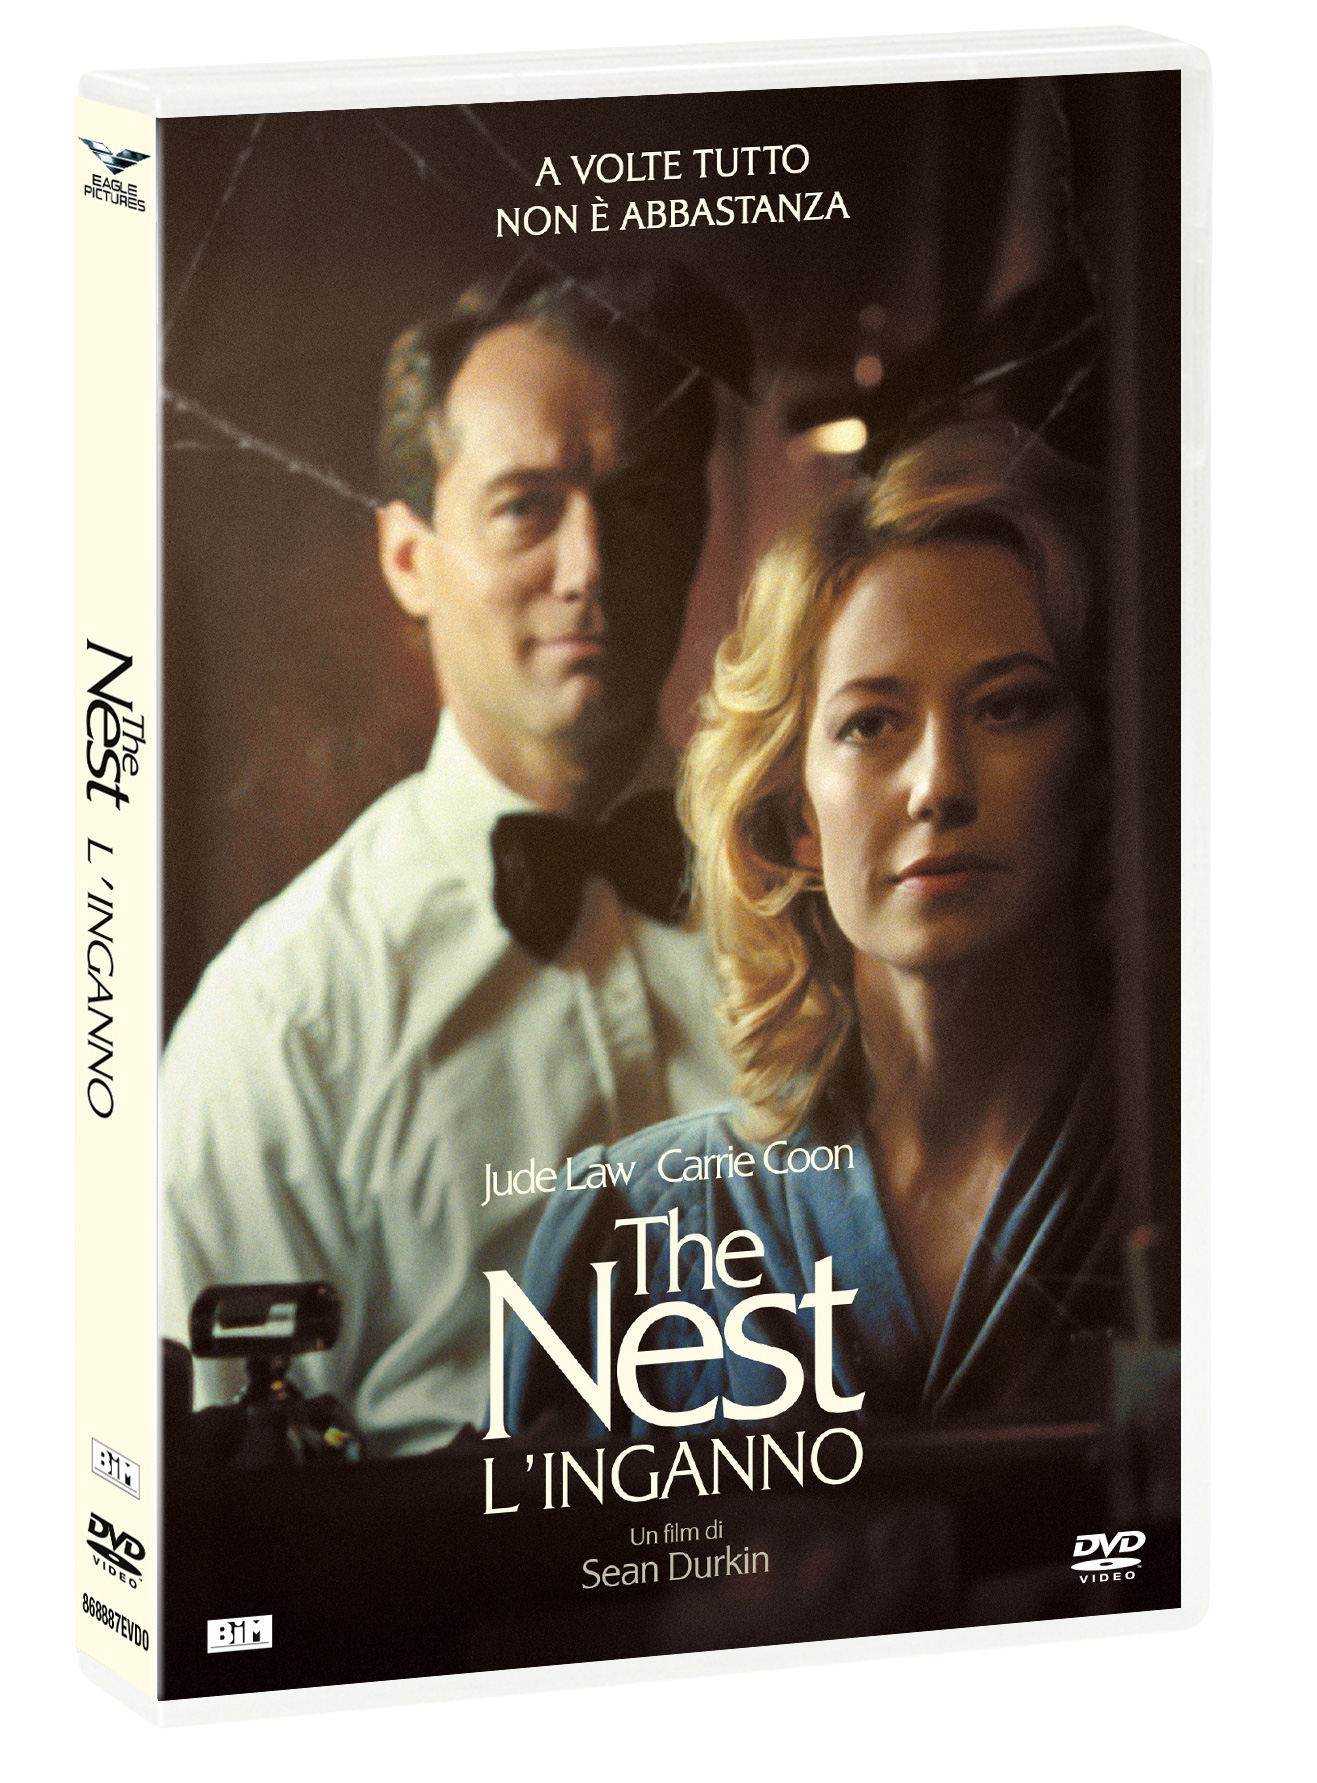 The Nest - L'inganno in DVD